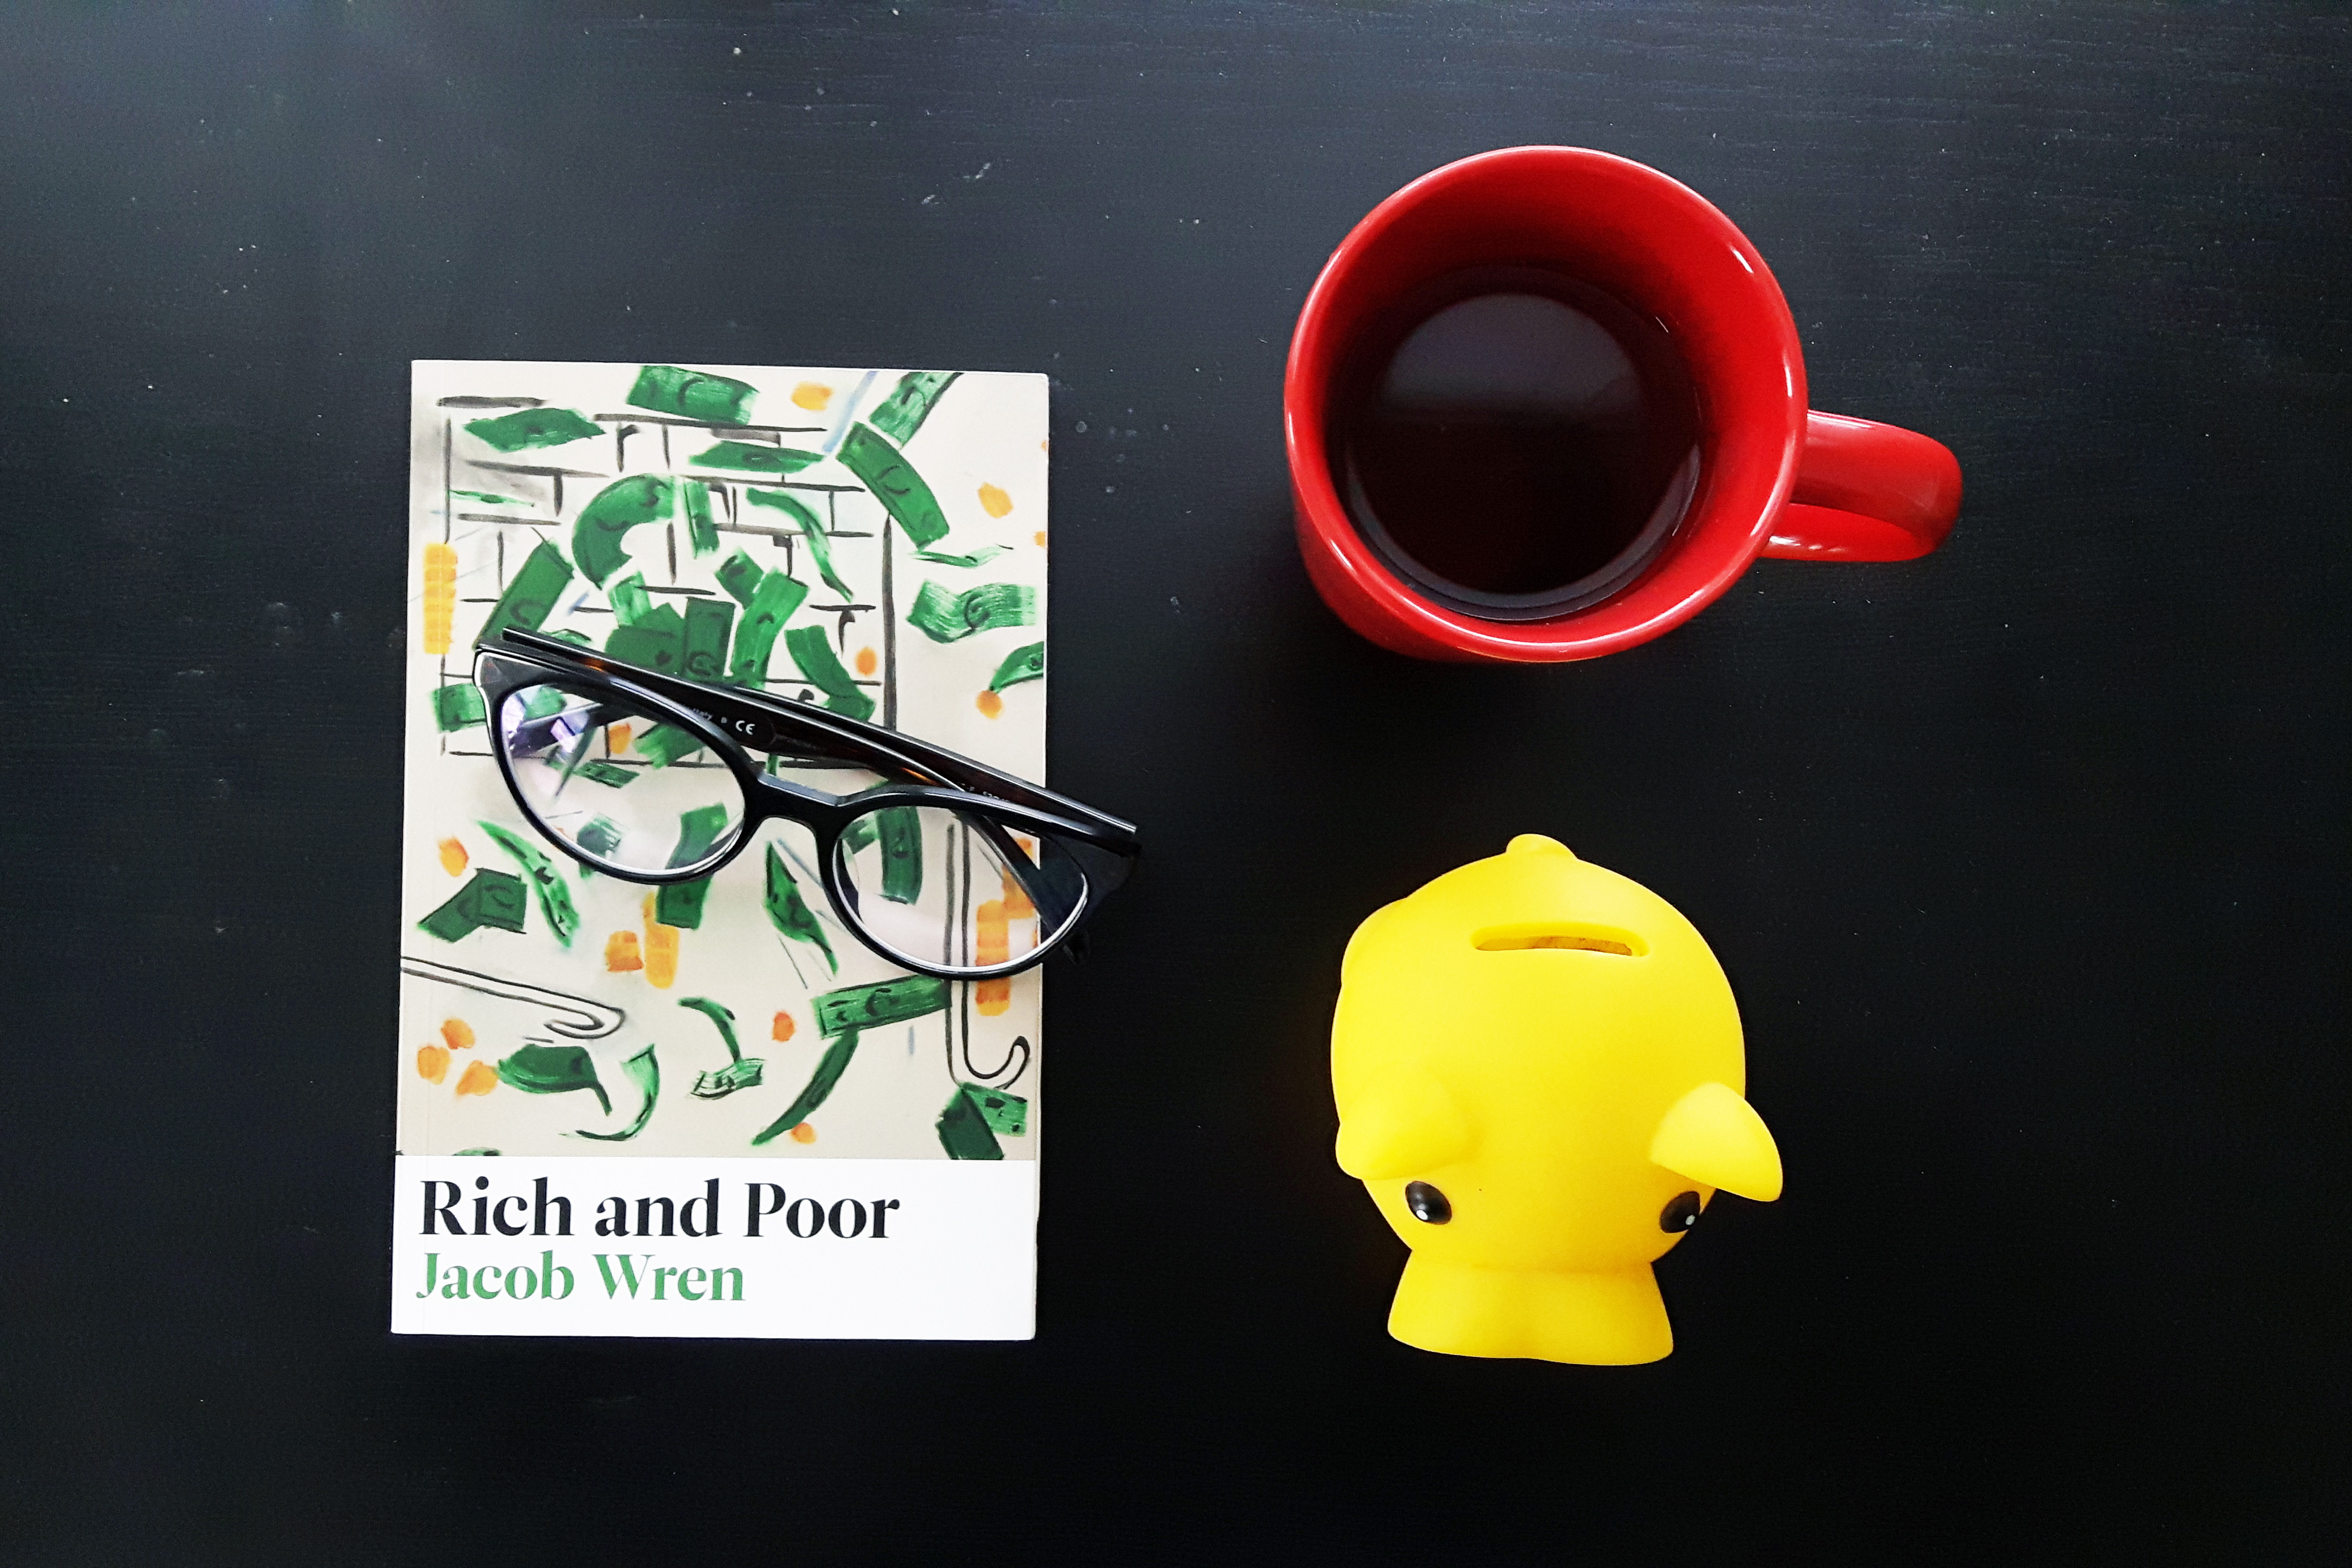 Rich and Poor by Jacob Wren